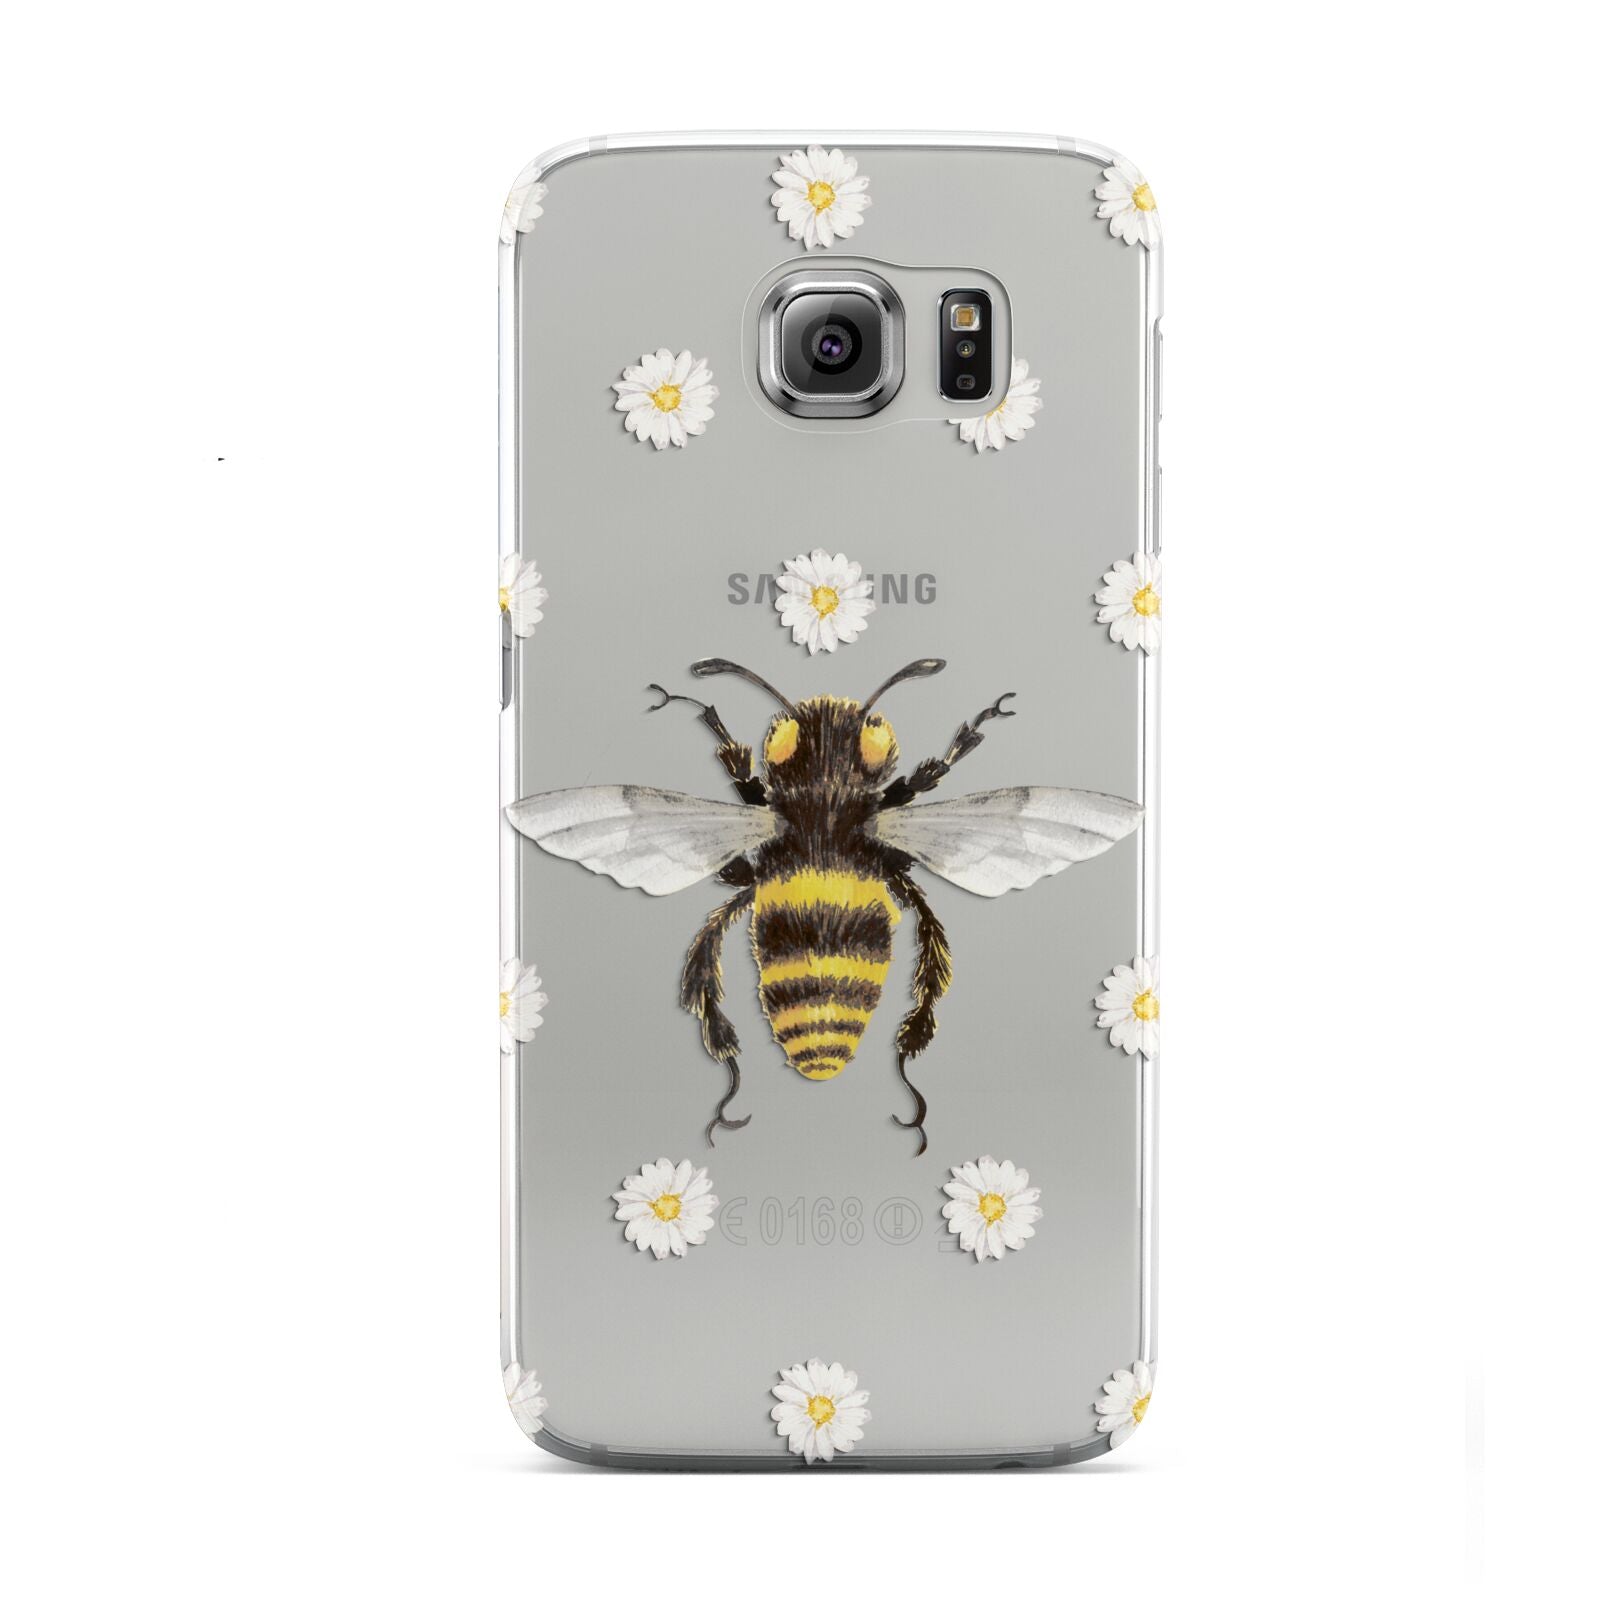 Bee Illustration with Daisies Samsung Galaxy S6 Case